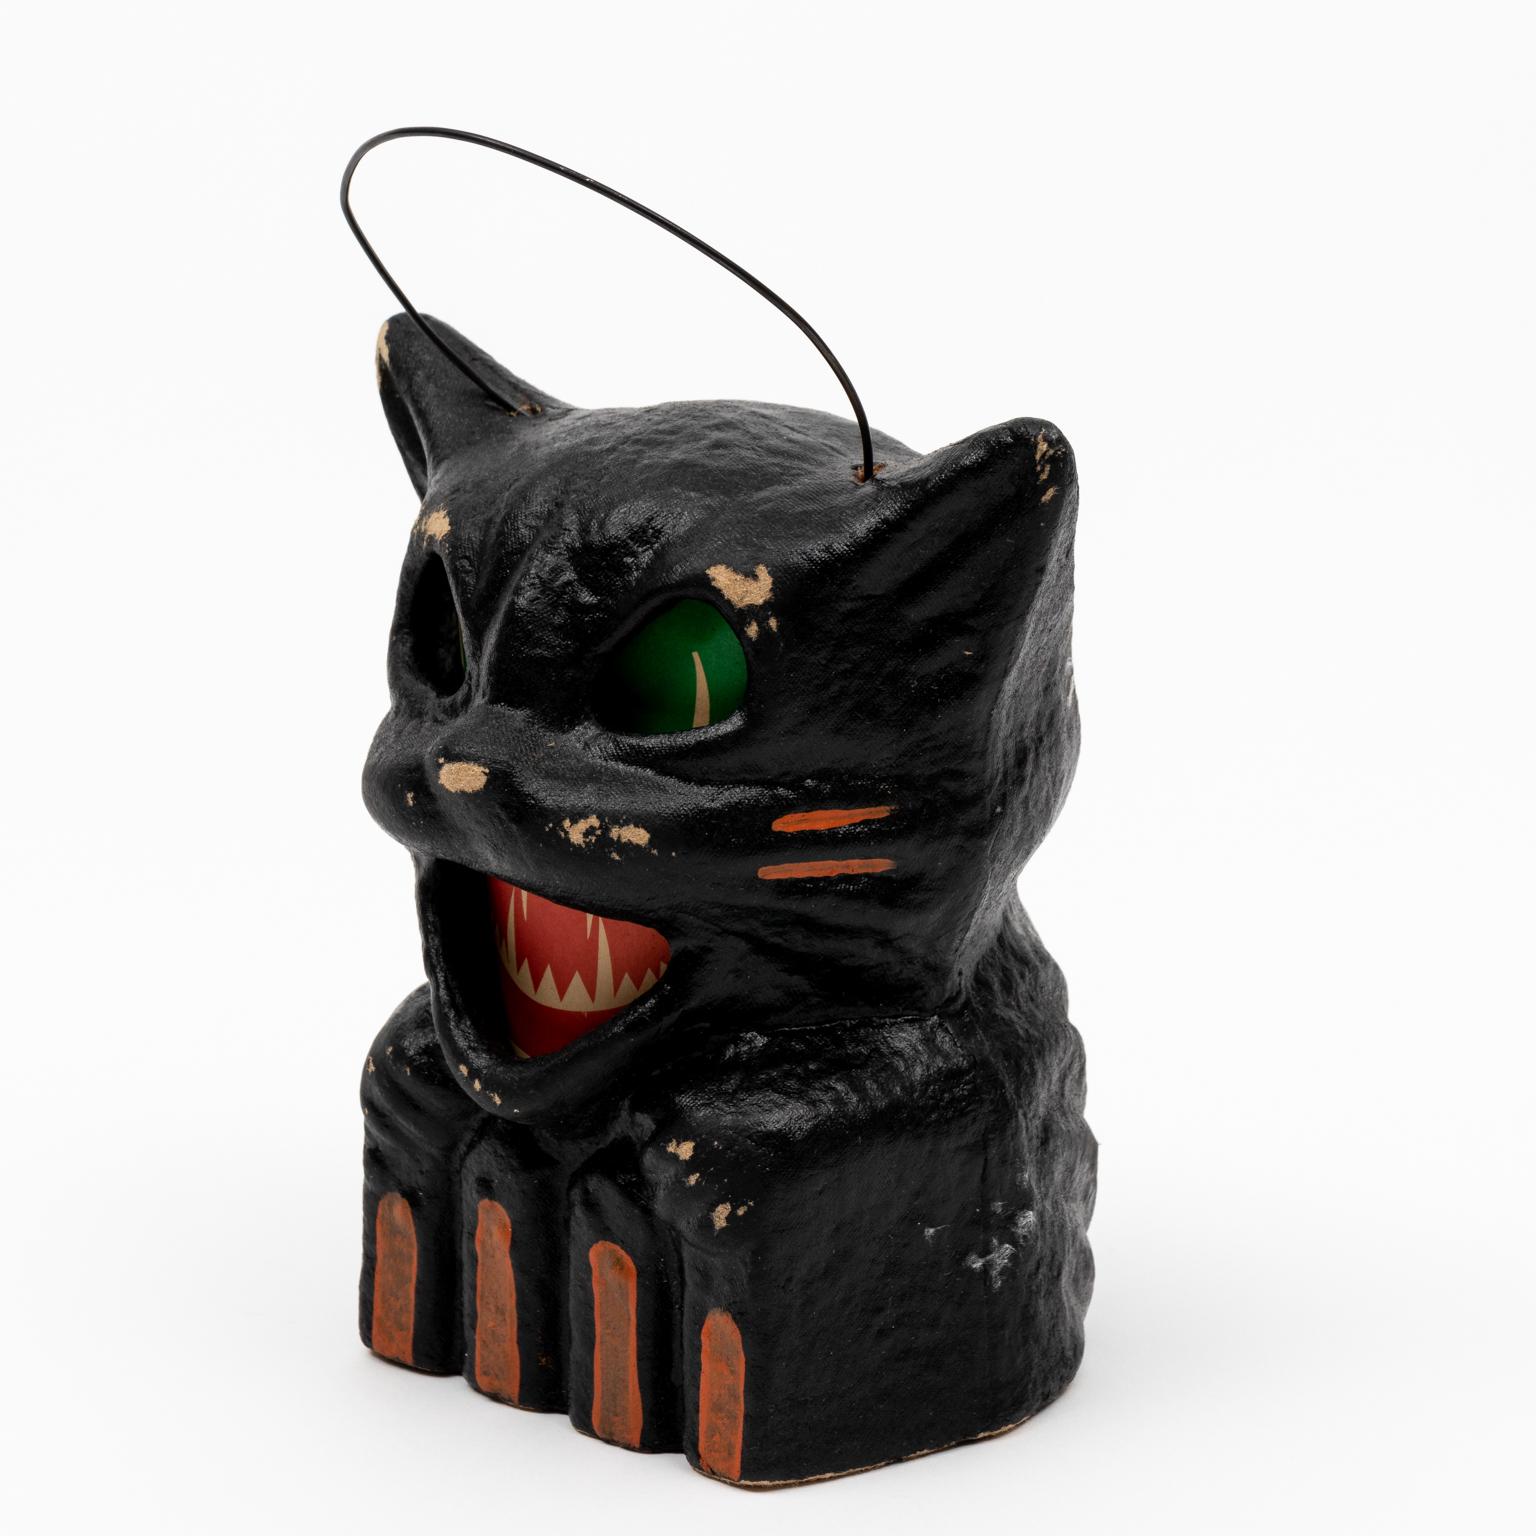 Circa 20th century Halloween themed paper mâché black cat lantern with paper insert. On the bottom of the cat it reads 